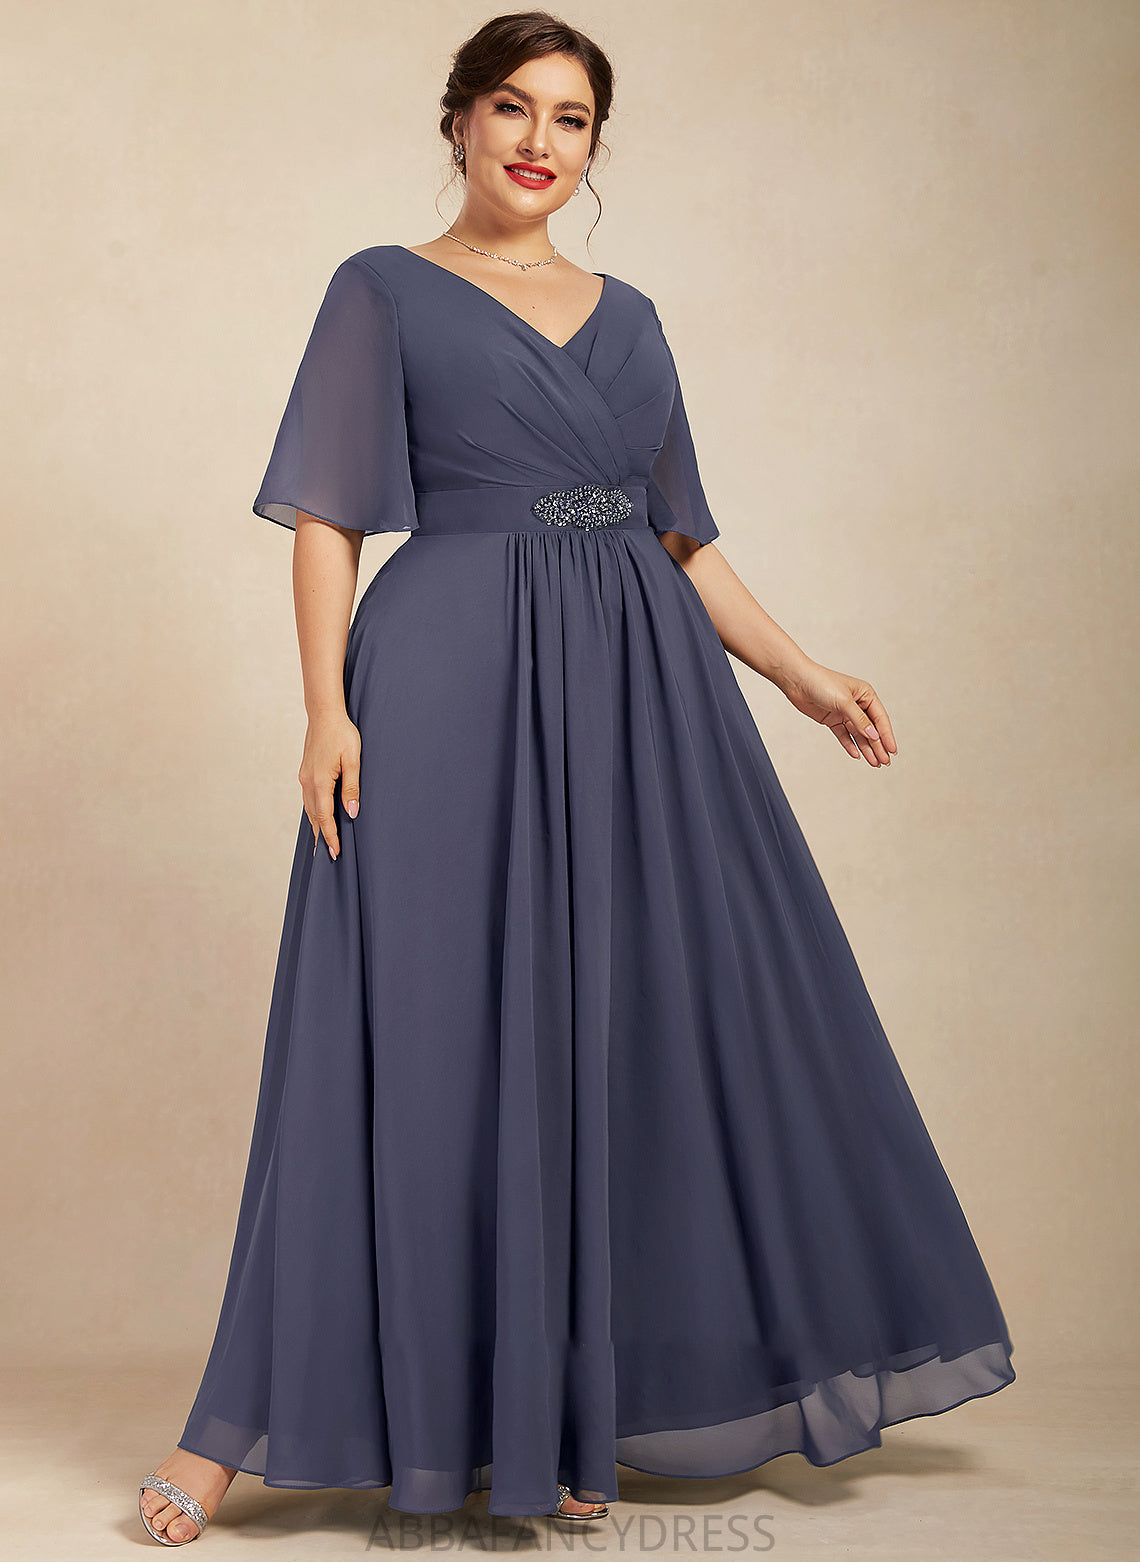 Jaylah the A-Line Mother Mother of the Bride Dresses Ankle-Length Beading Chiffon of Dress Ruffle With V-neck Bride Sequins